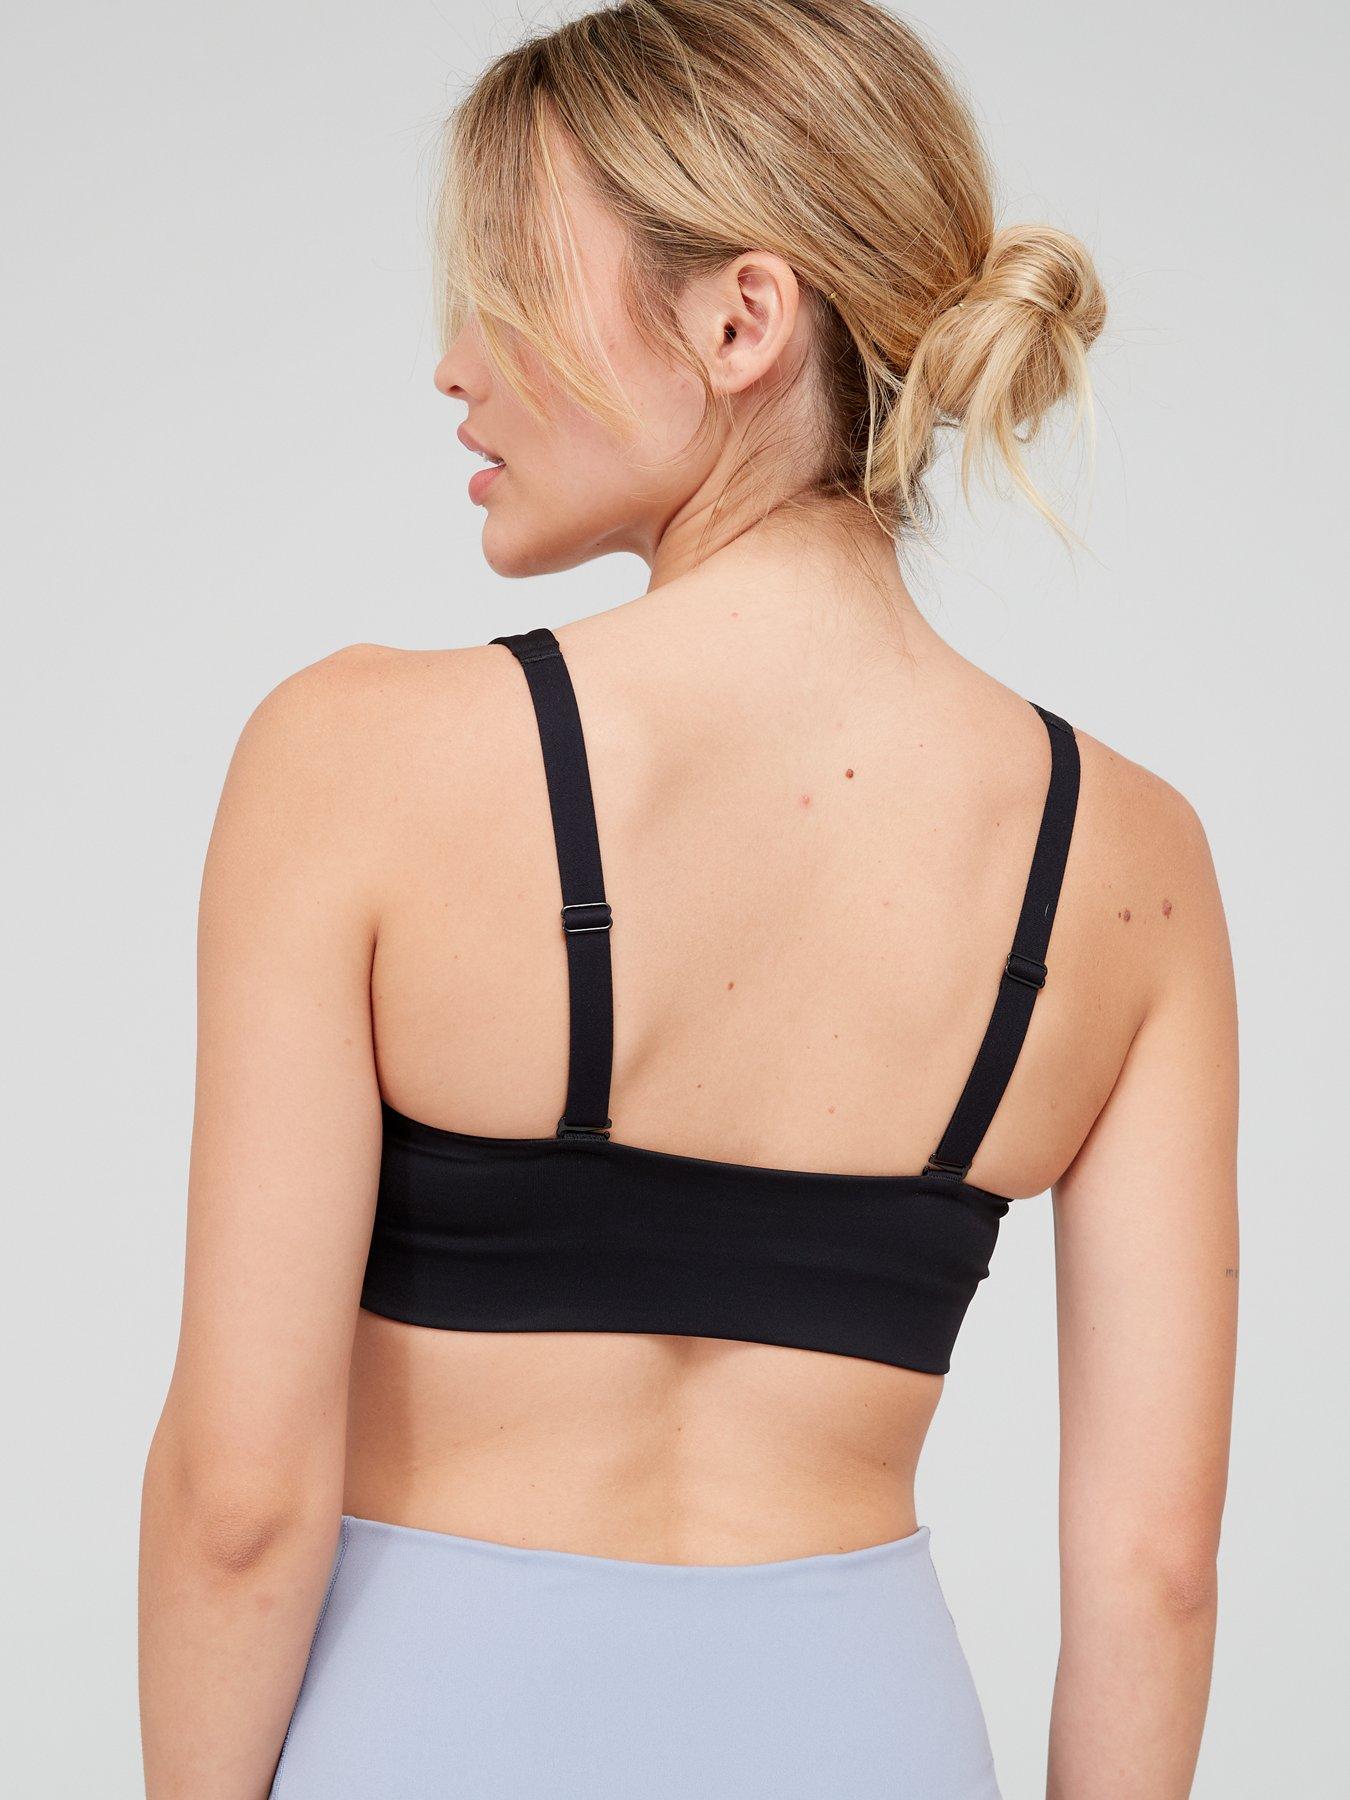 Made Gold Black Racerback Sports Bra Women's Size Extra Small XS - $33 -  From Taylor